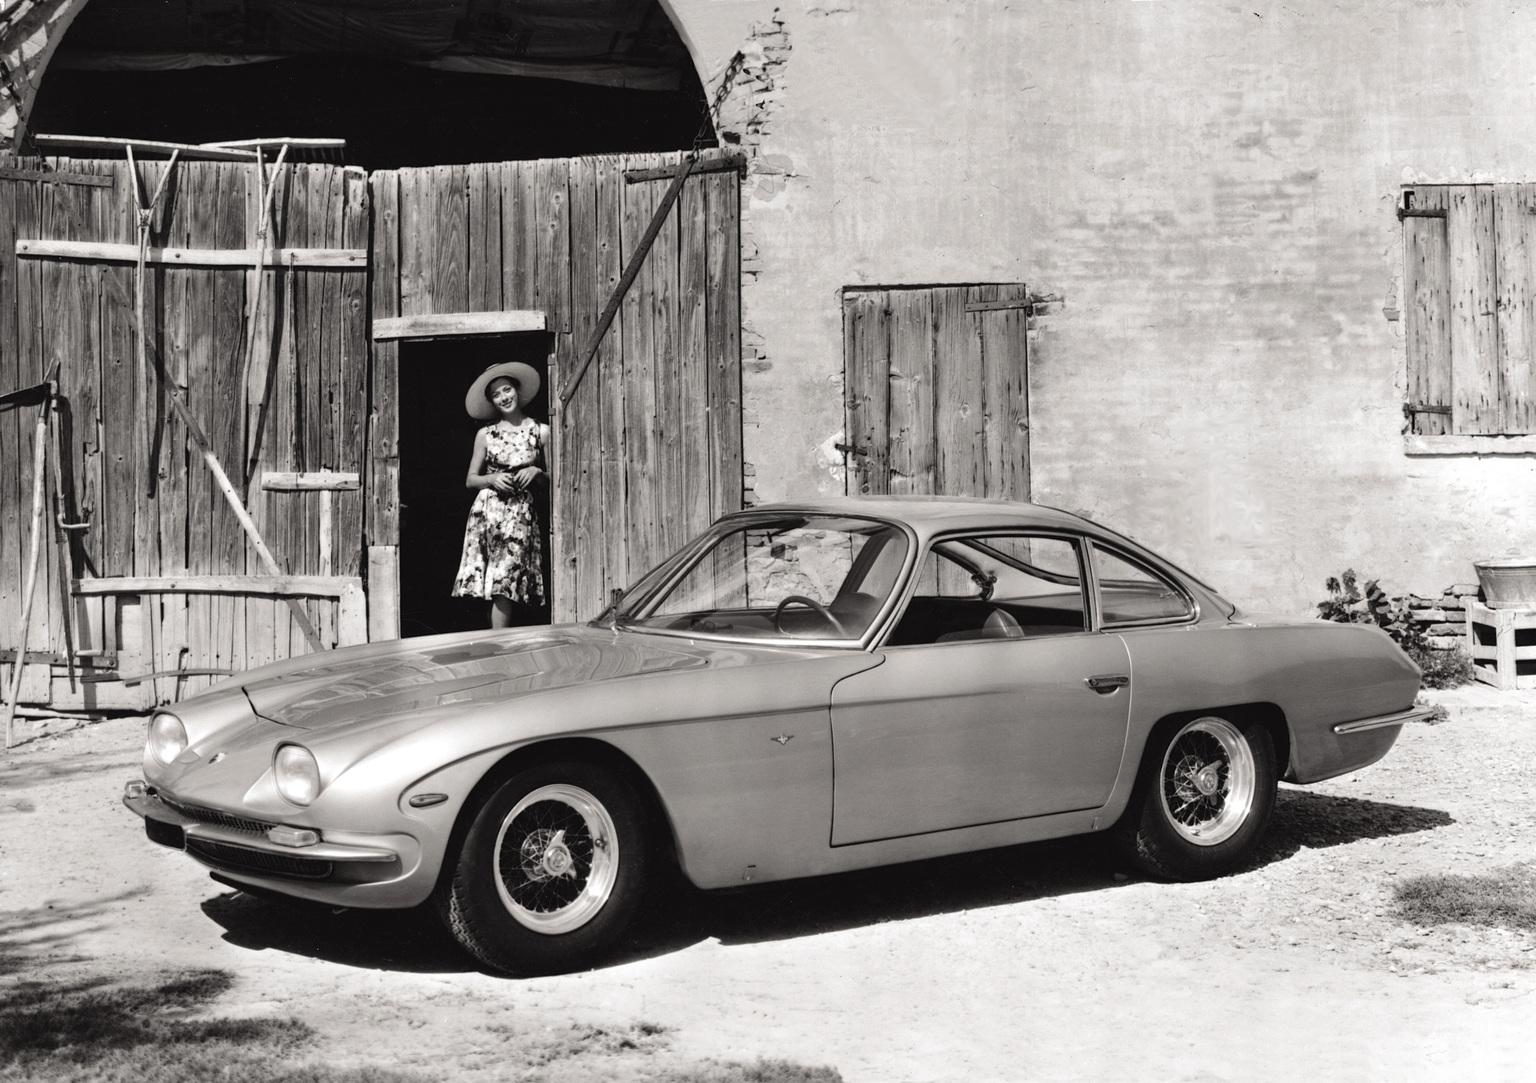 The 350 gt was the first lamborghini v12 models